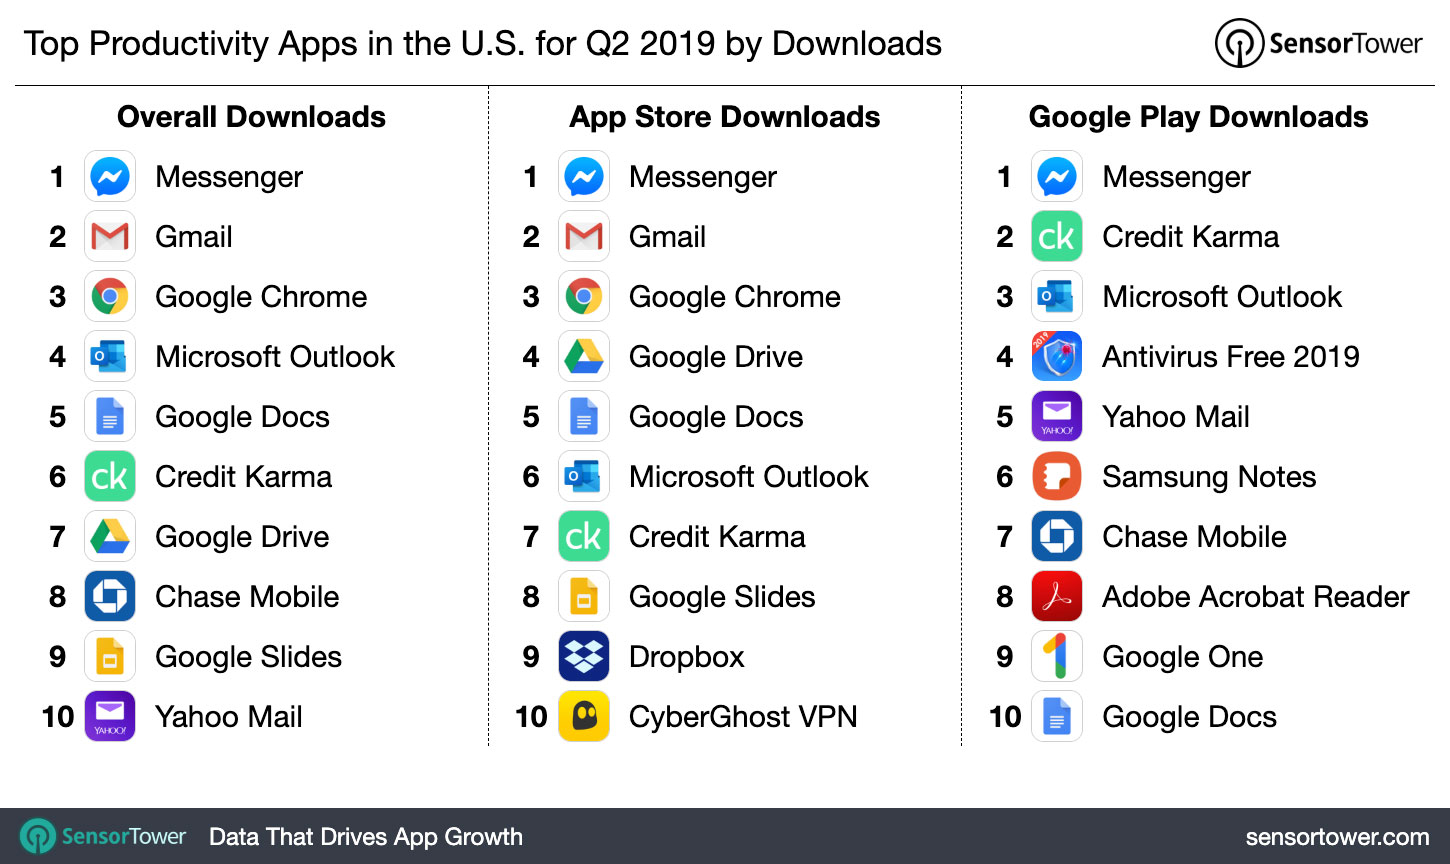 Top Productivity Apps in the U.S. for Q2 2019 by Downloads